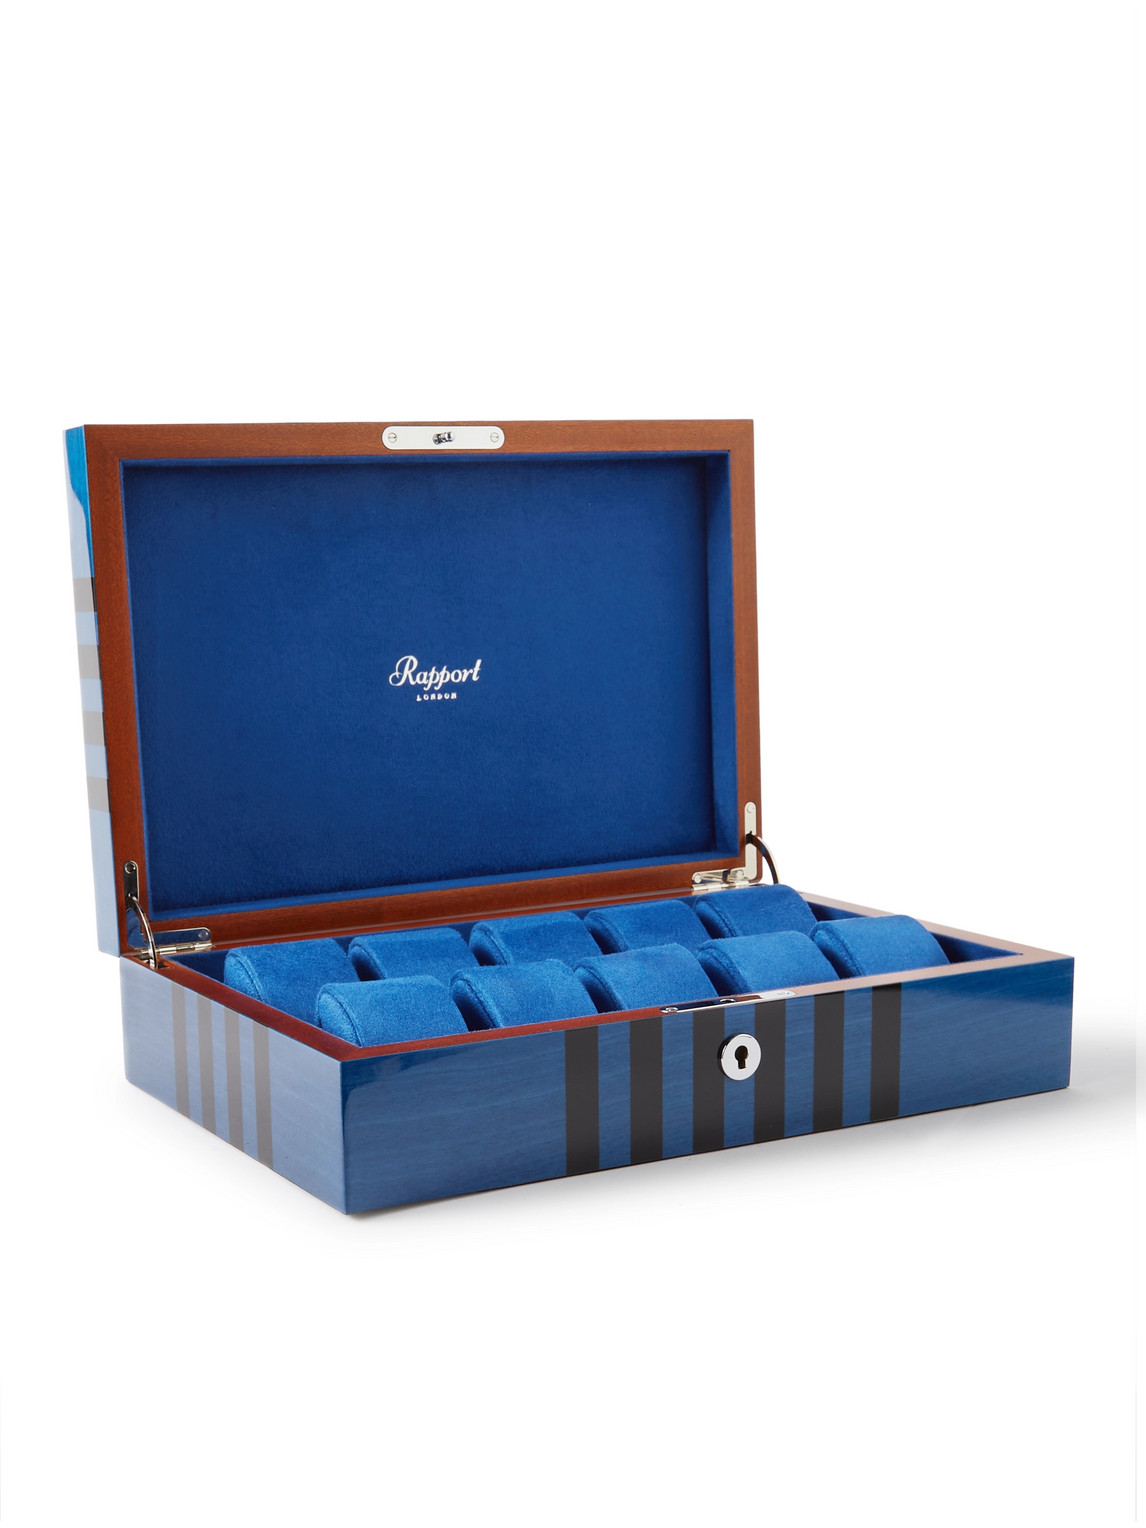 Labyrinth Striped Lacquered Wood 10-Piece Watch Box